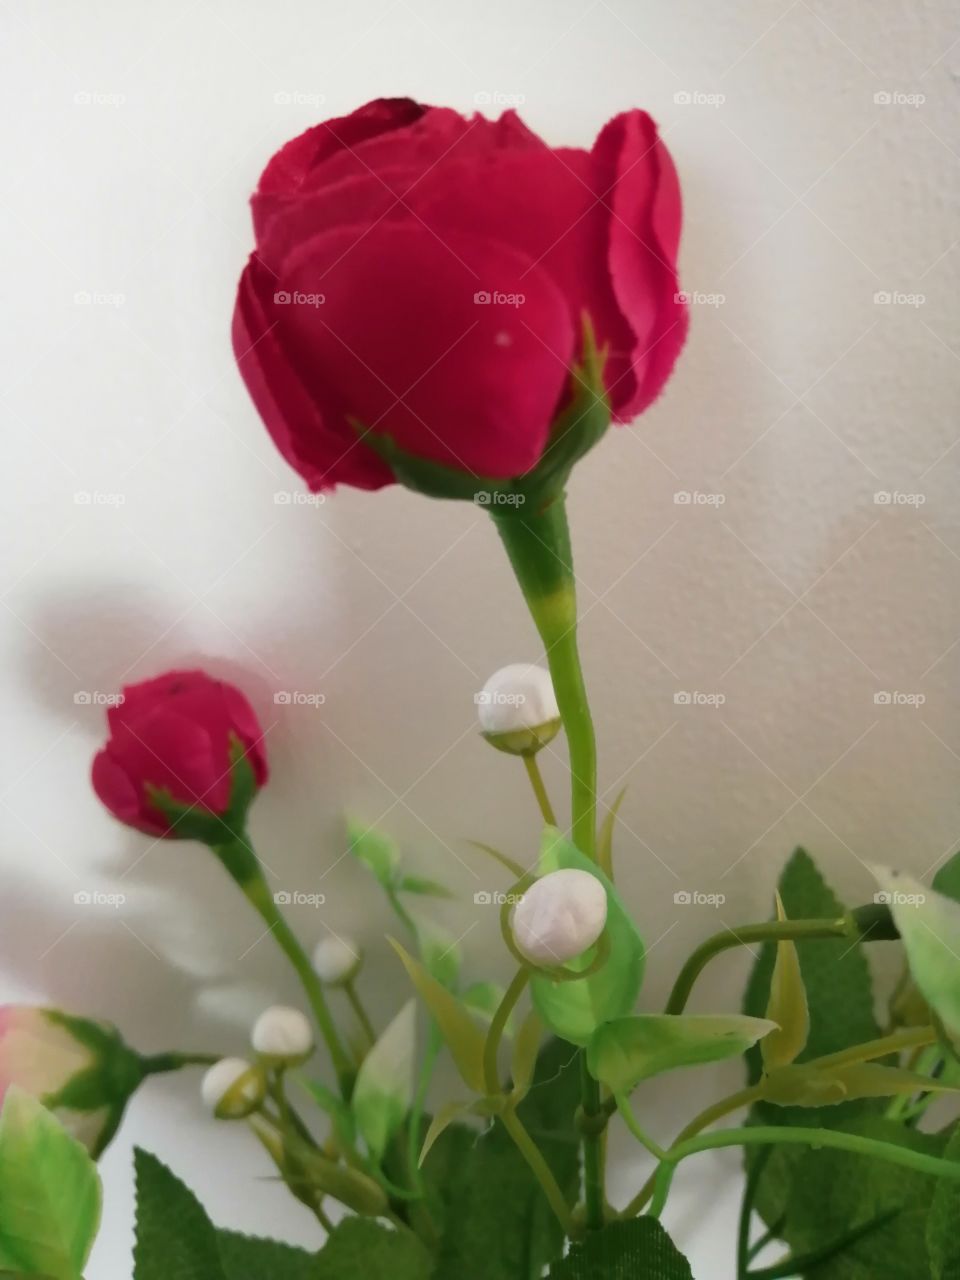 The nice red rose